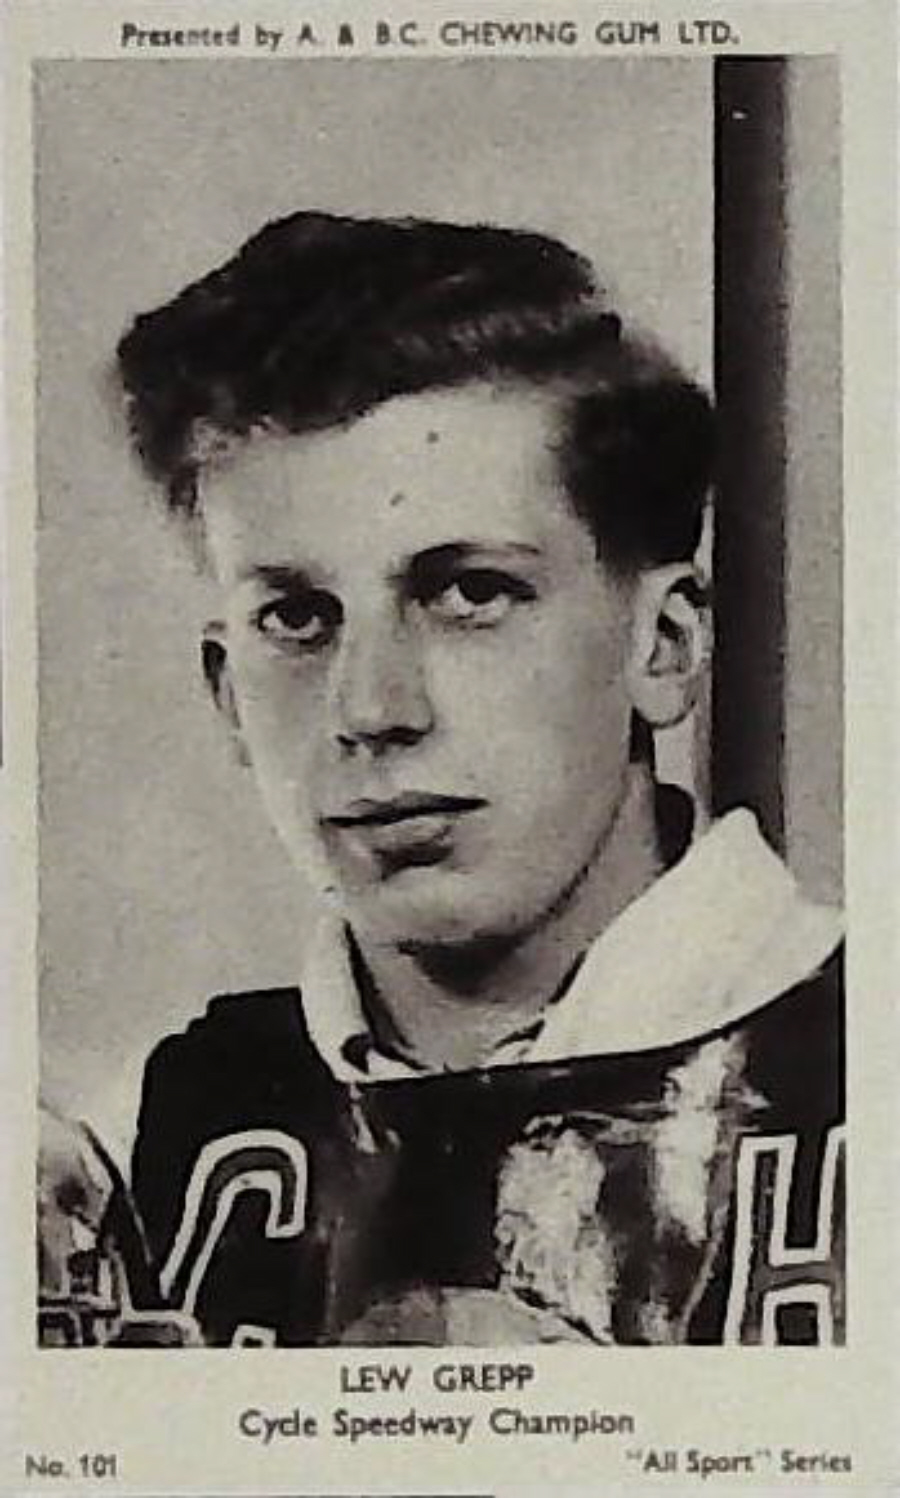 A & B C 1954 All Sports Cycle Speedway Lew Grepp No 101